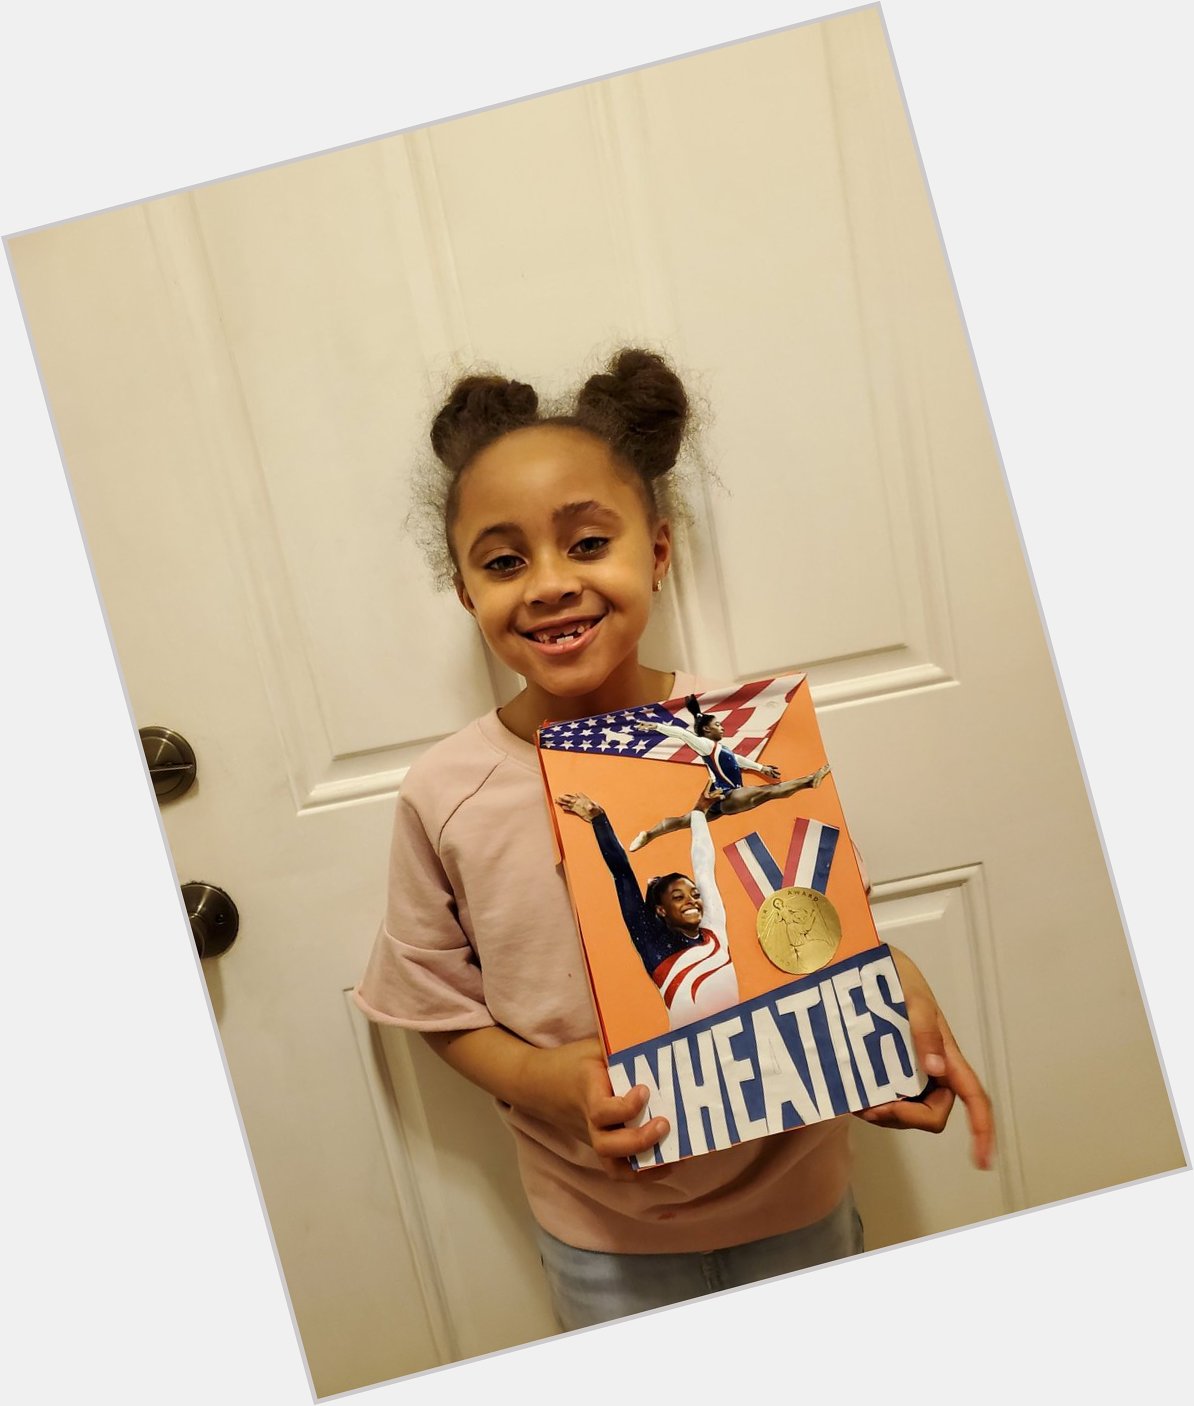 Happy birthday my daughter finished her project and wheaties box on you 